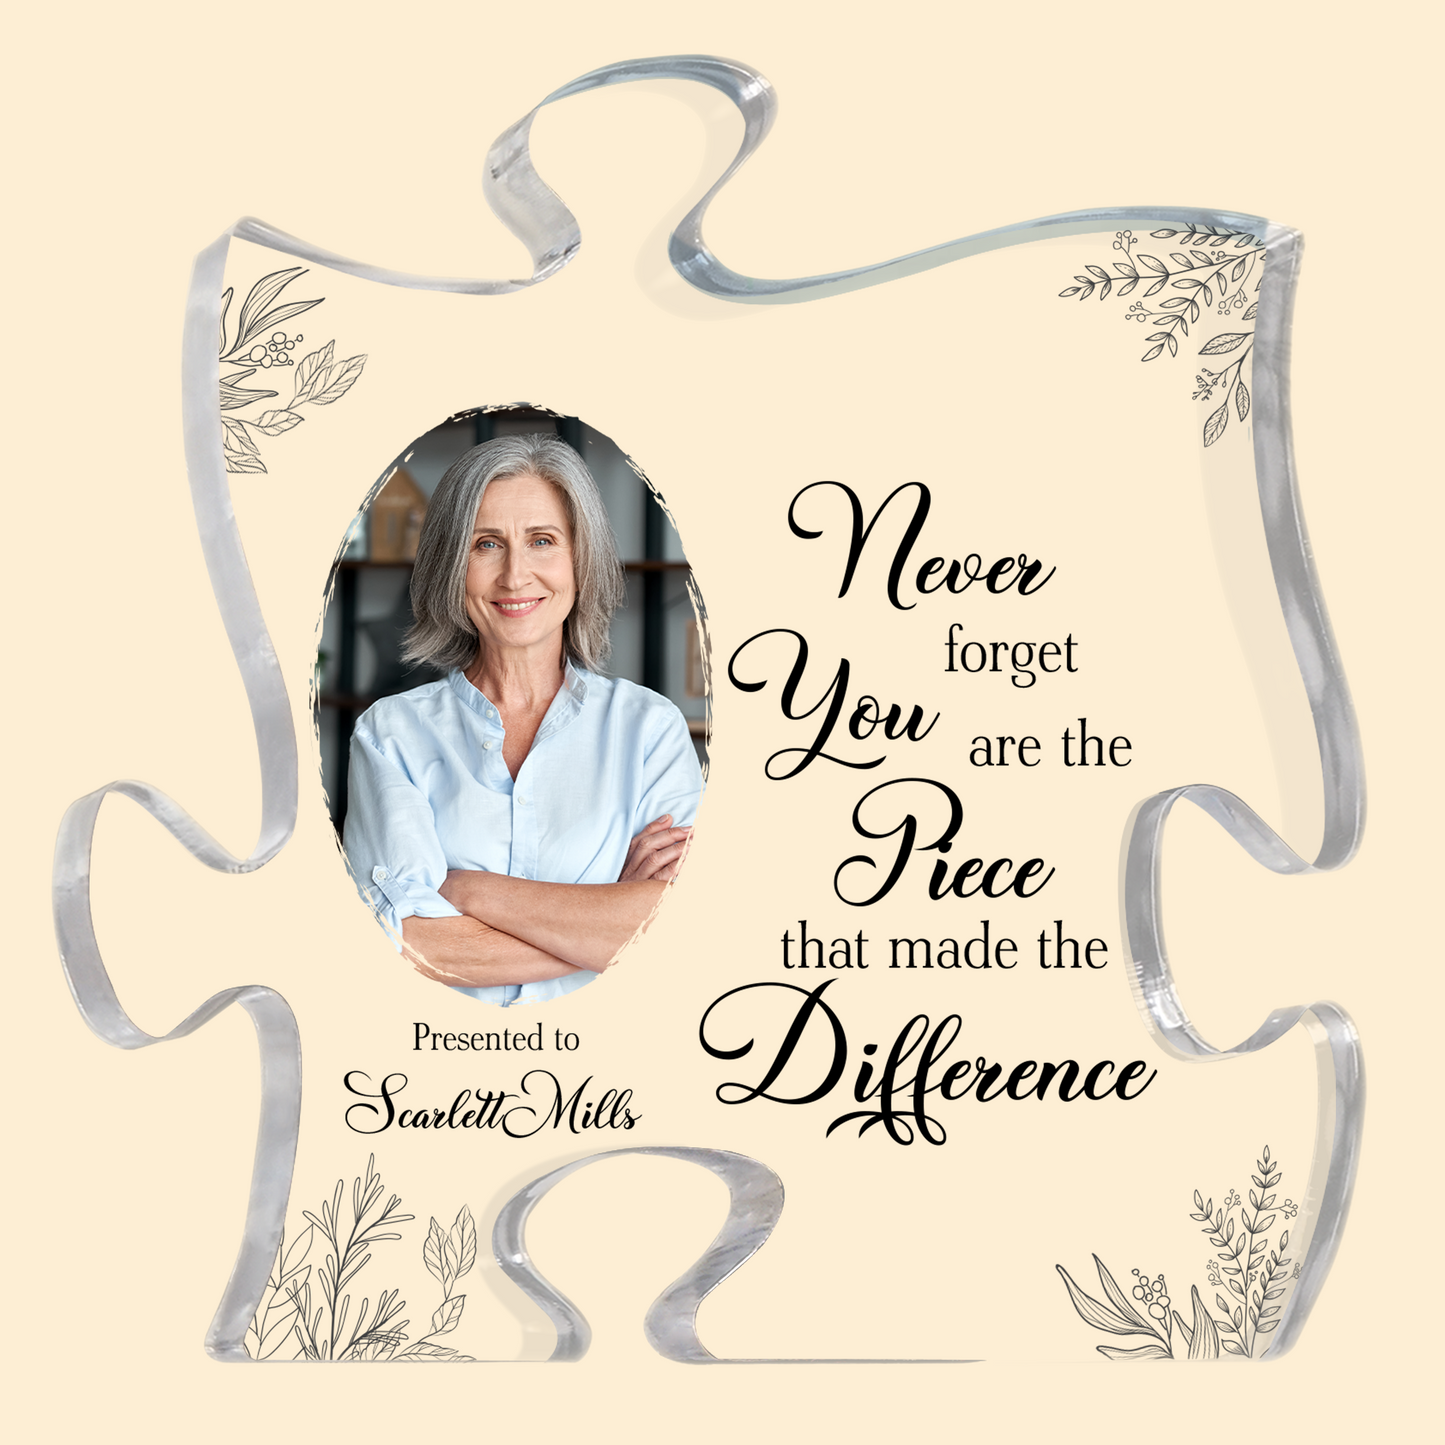 Never Forget You Are The Piece Made The Diffrence - Personalized Acrylic Photo Plaque